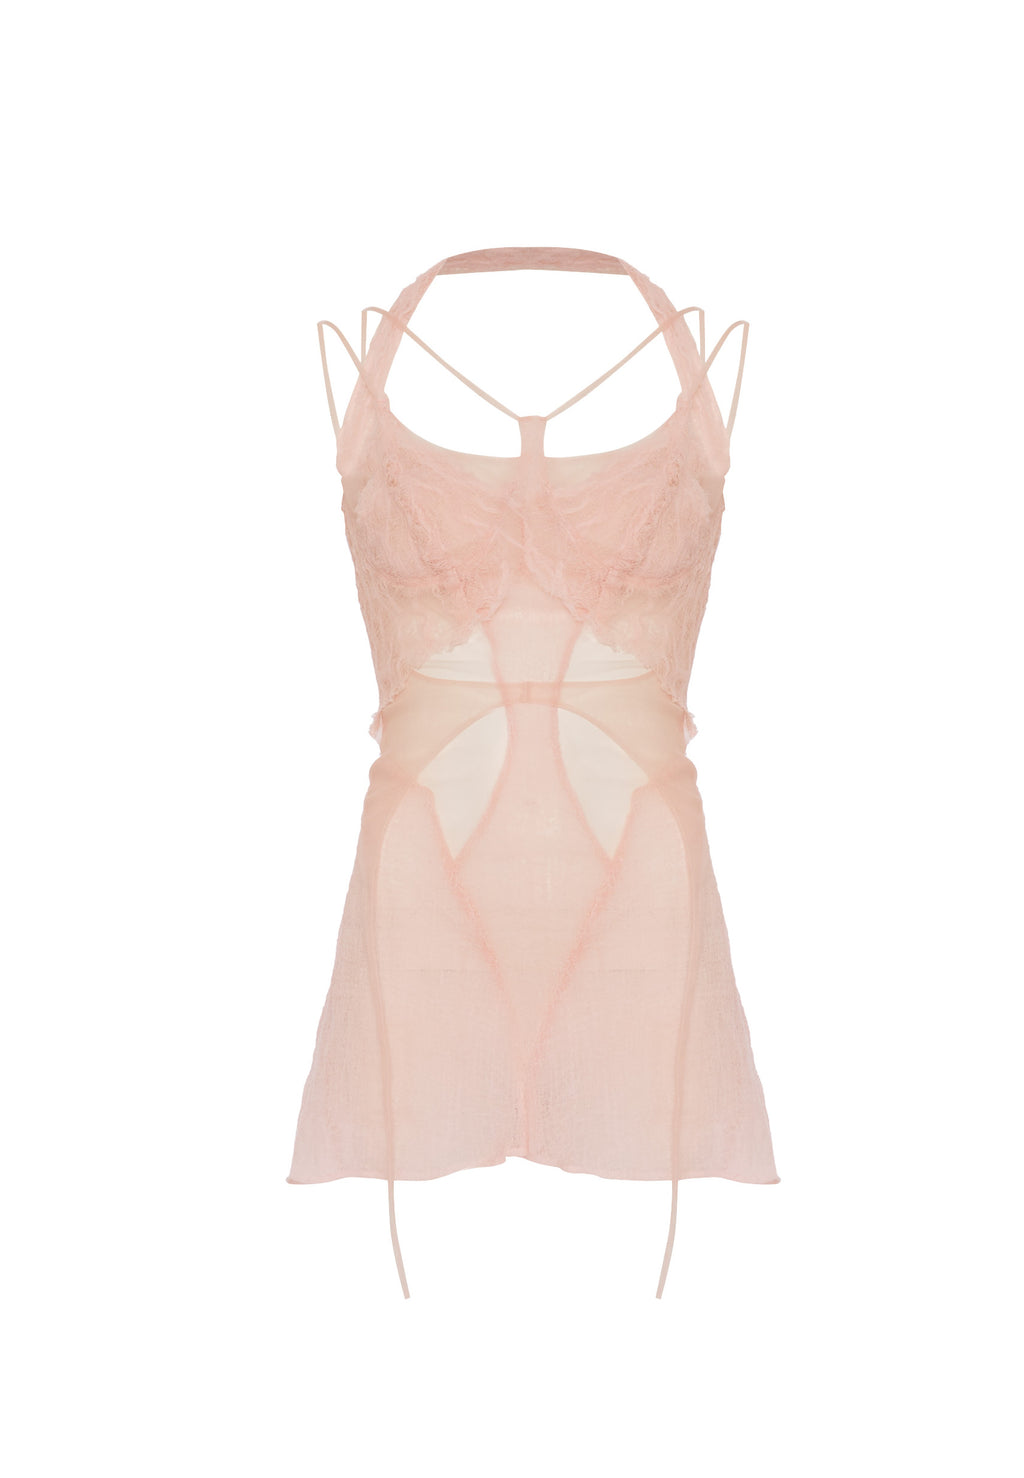 Deconstructed Cup Pink Dress